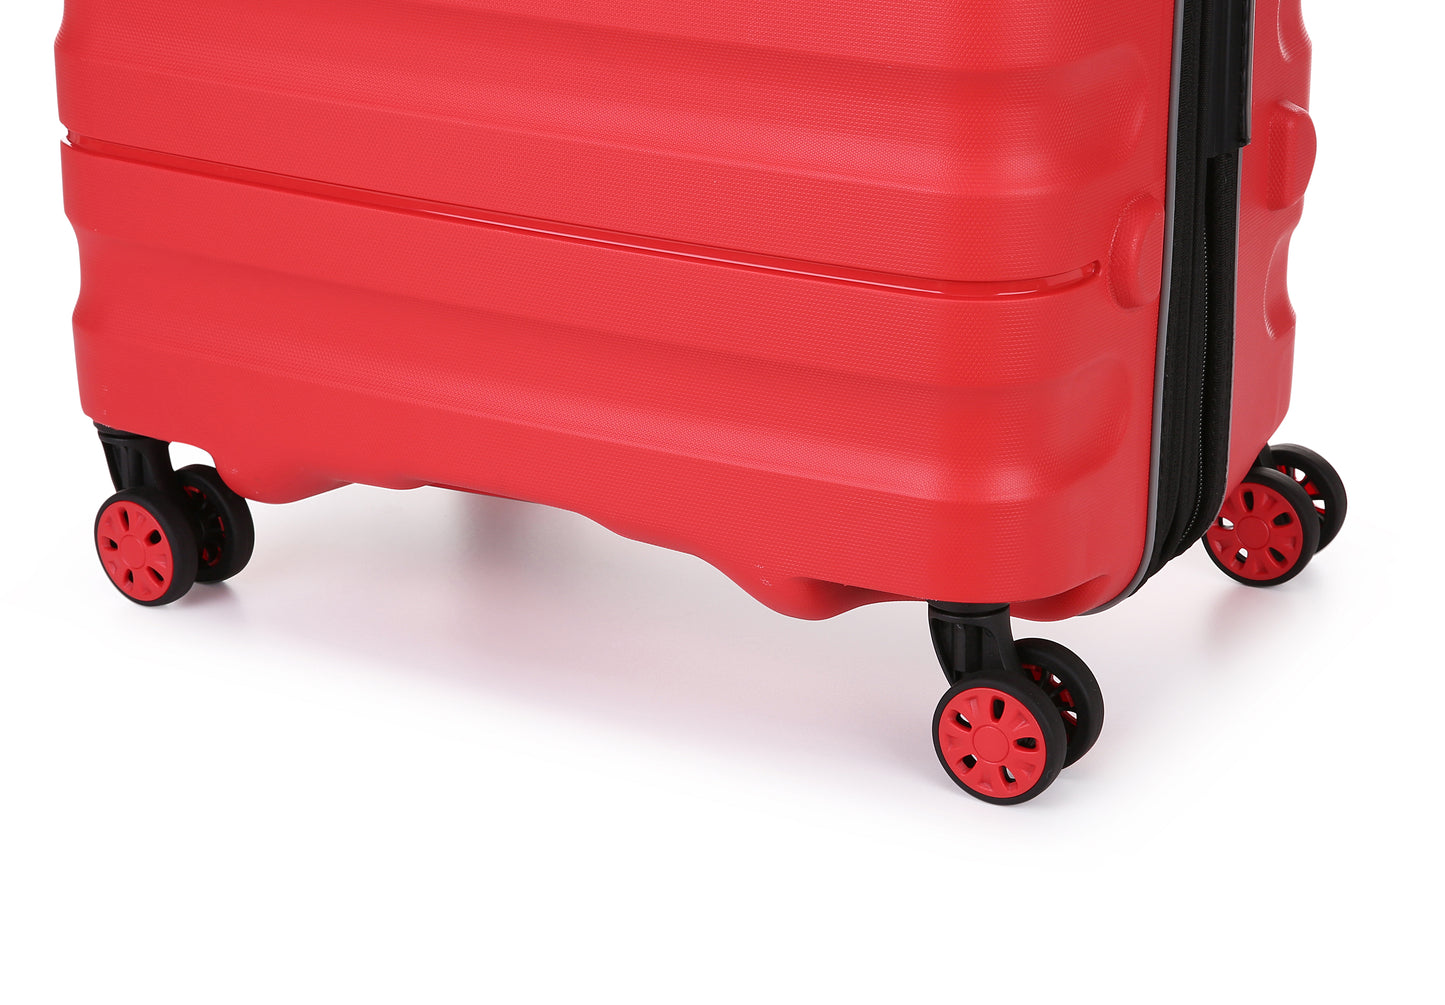 Antler – Lincoln Small 56cm Hardside 4 Wheel Suitcase – Red